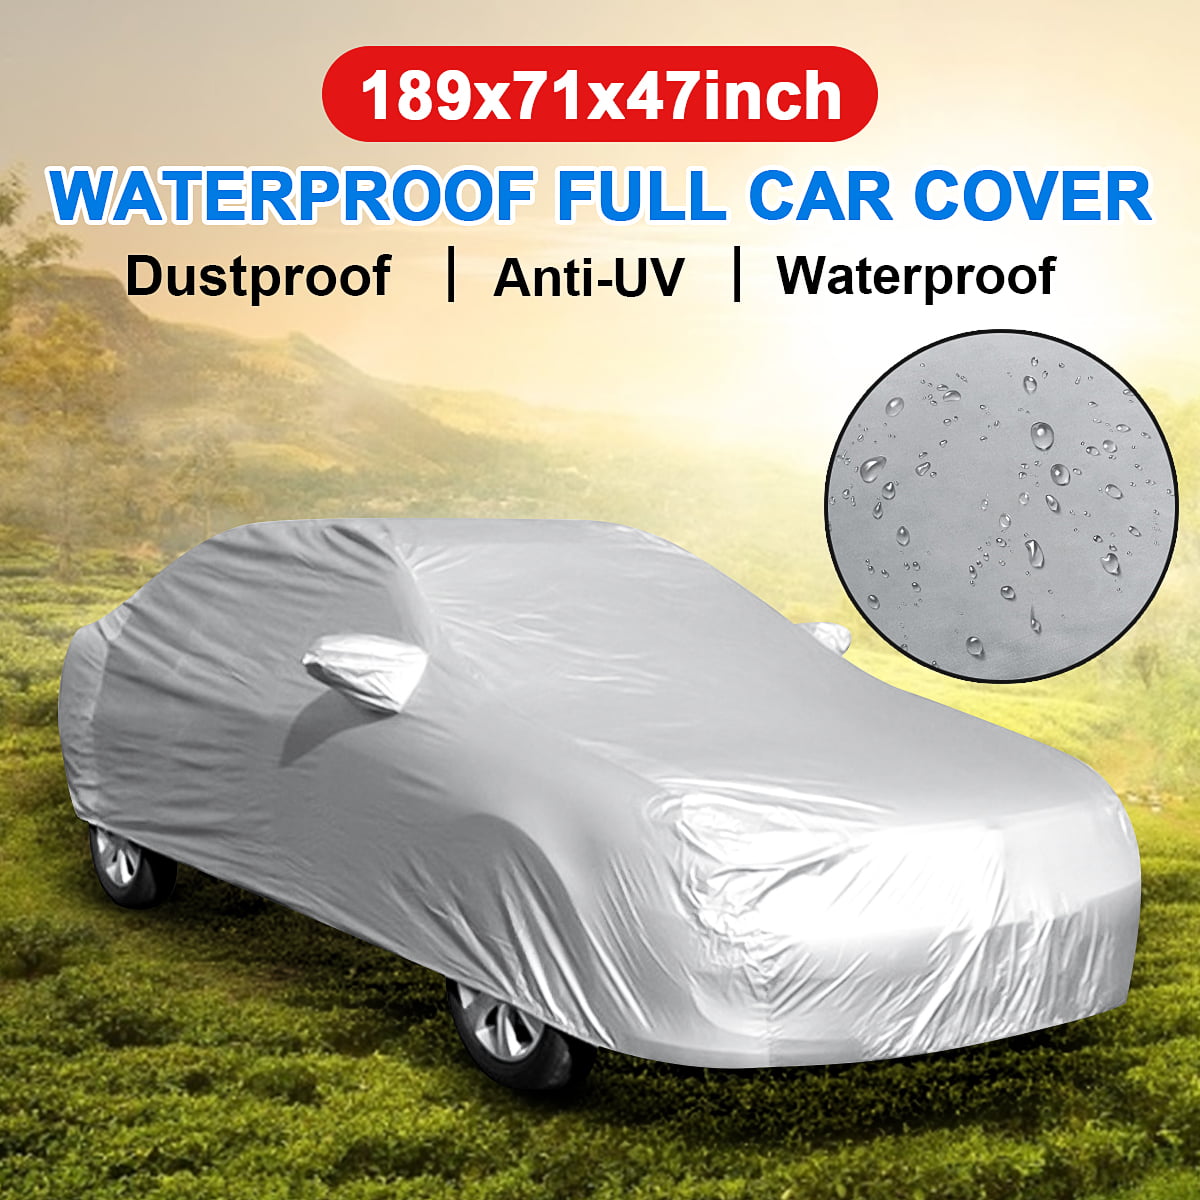 Full Auto Car Cover for Mazda 6 Motor Trend Waterproof Indoor Outdoor Protection